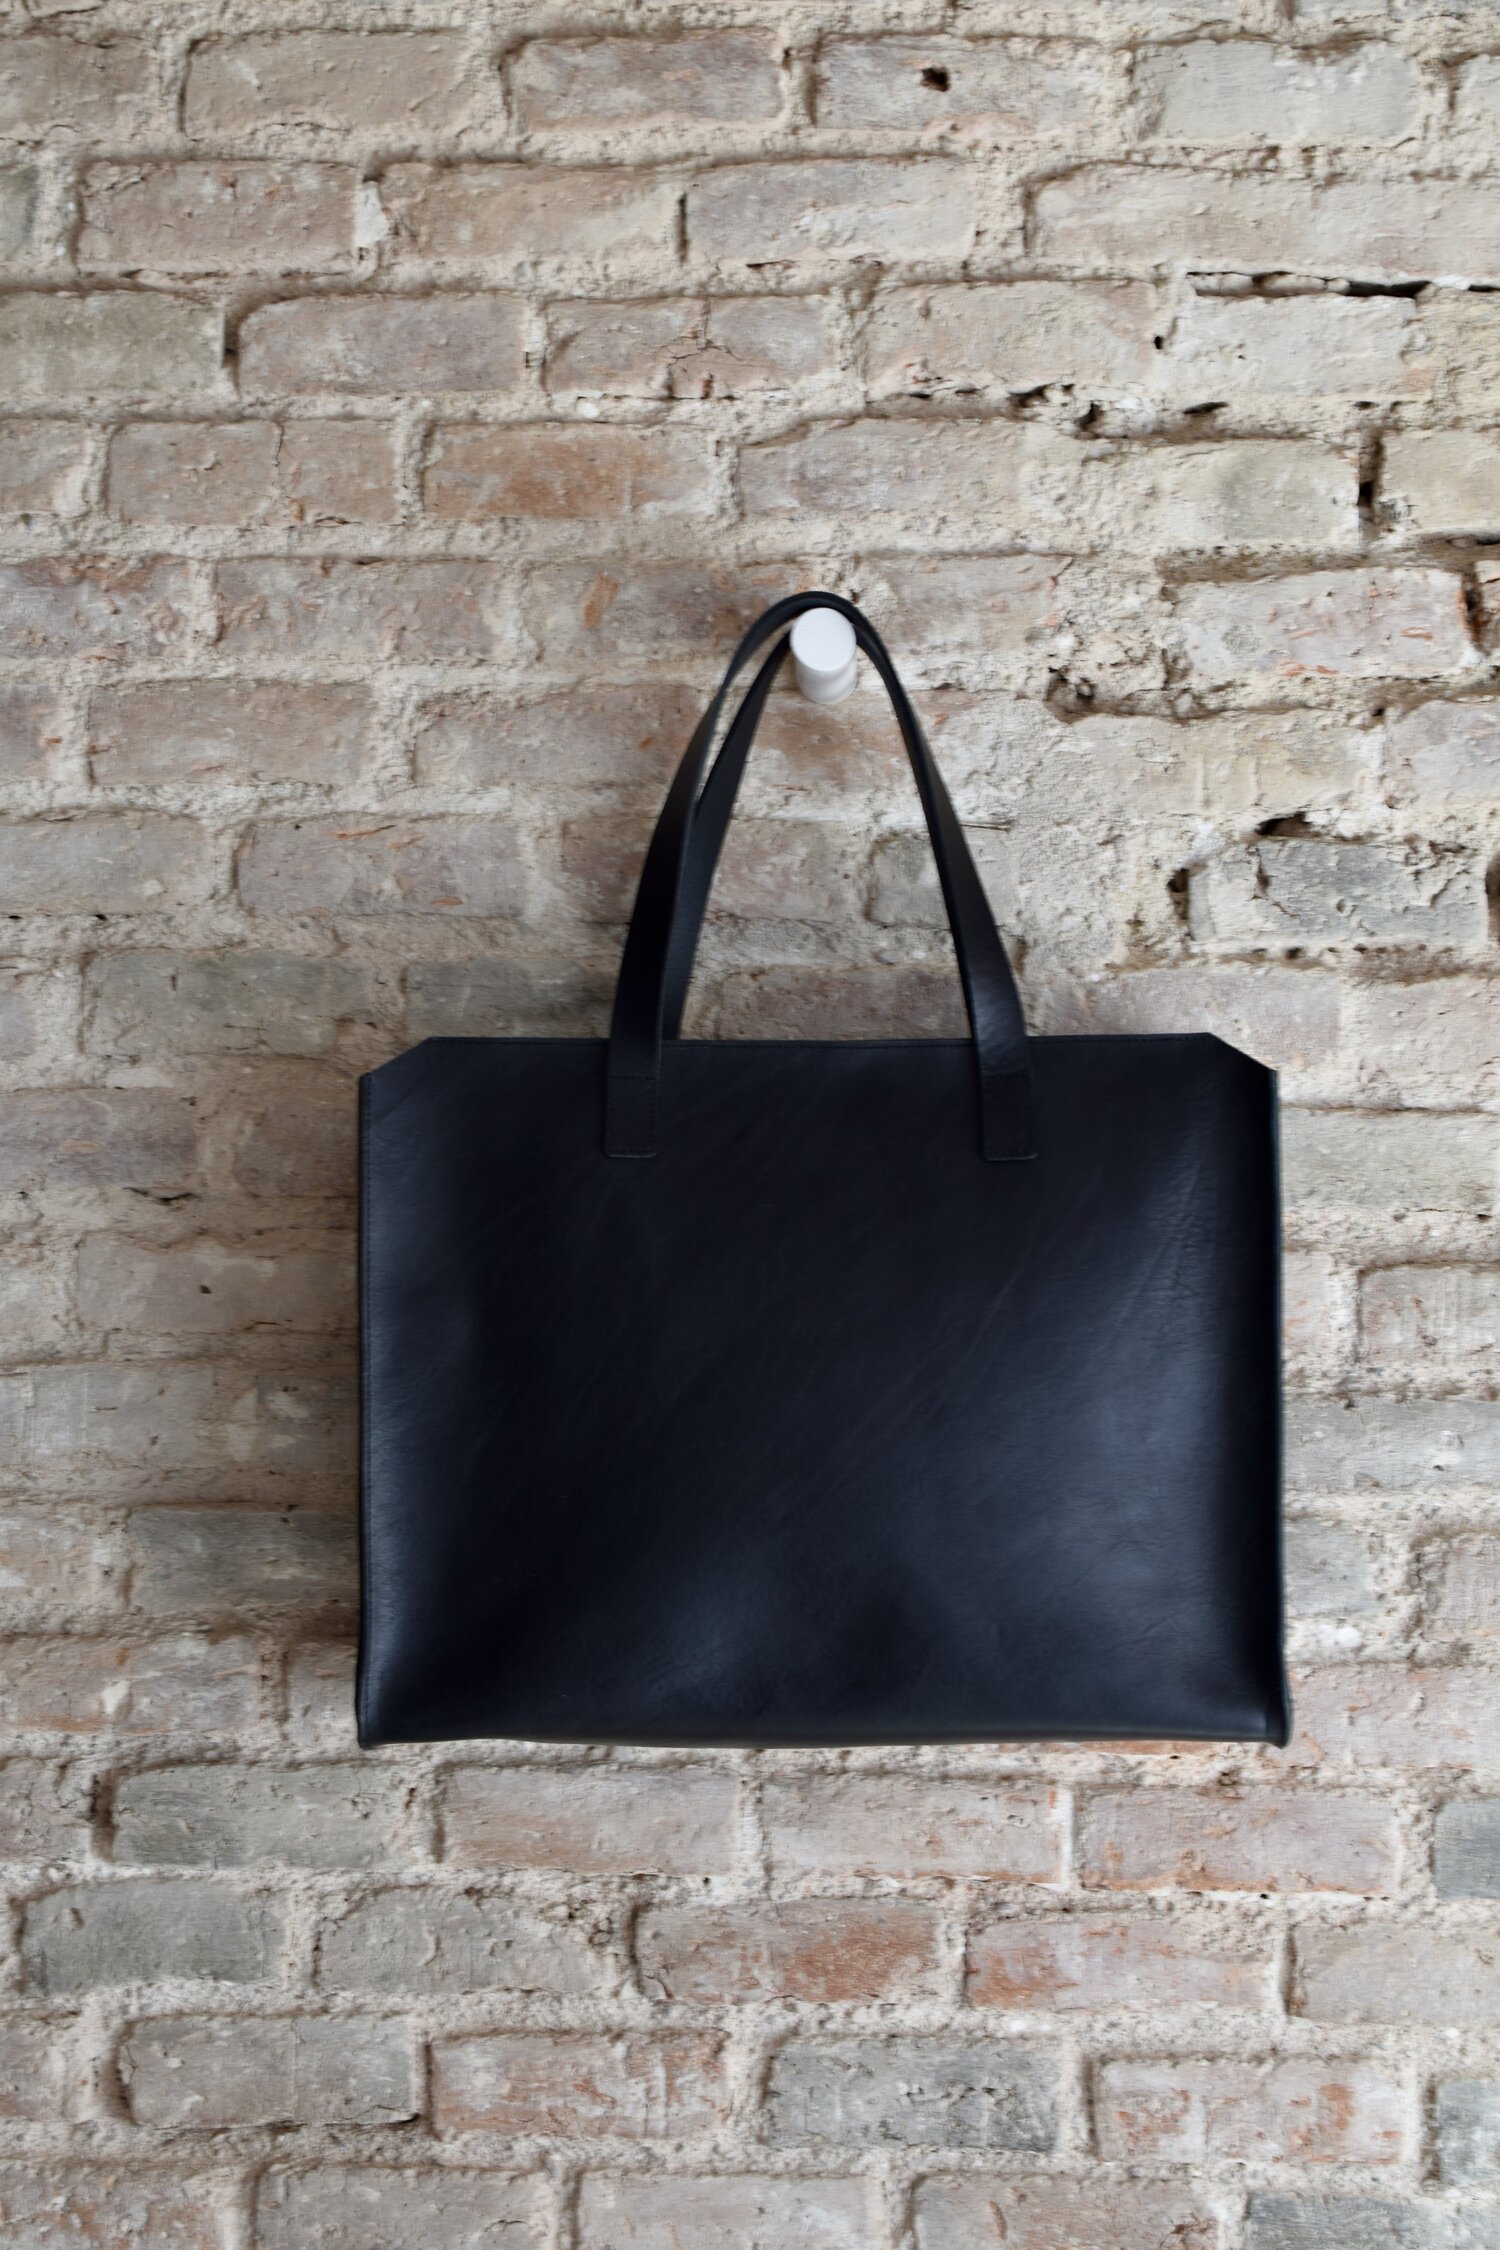 Retire Necessities Clasp Black Natural Leather tote bag with Zipper. Architect bag in Black leather.  — Vermut Atelier